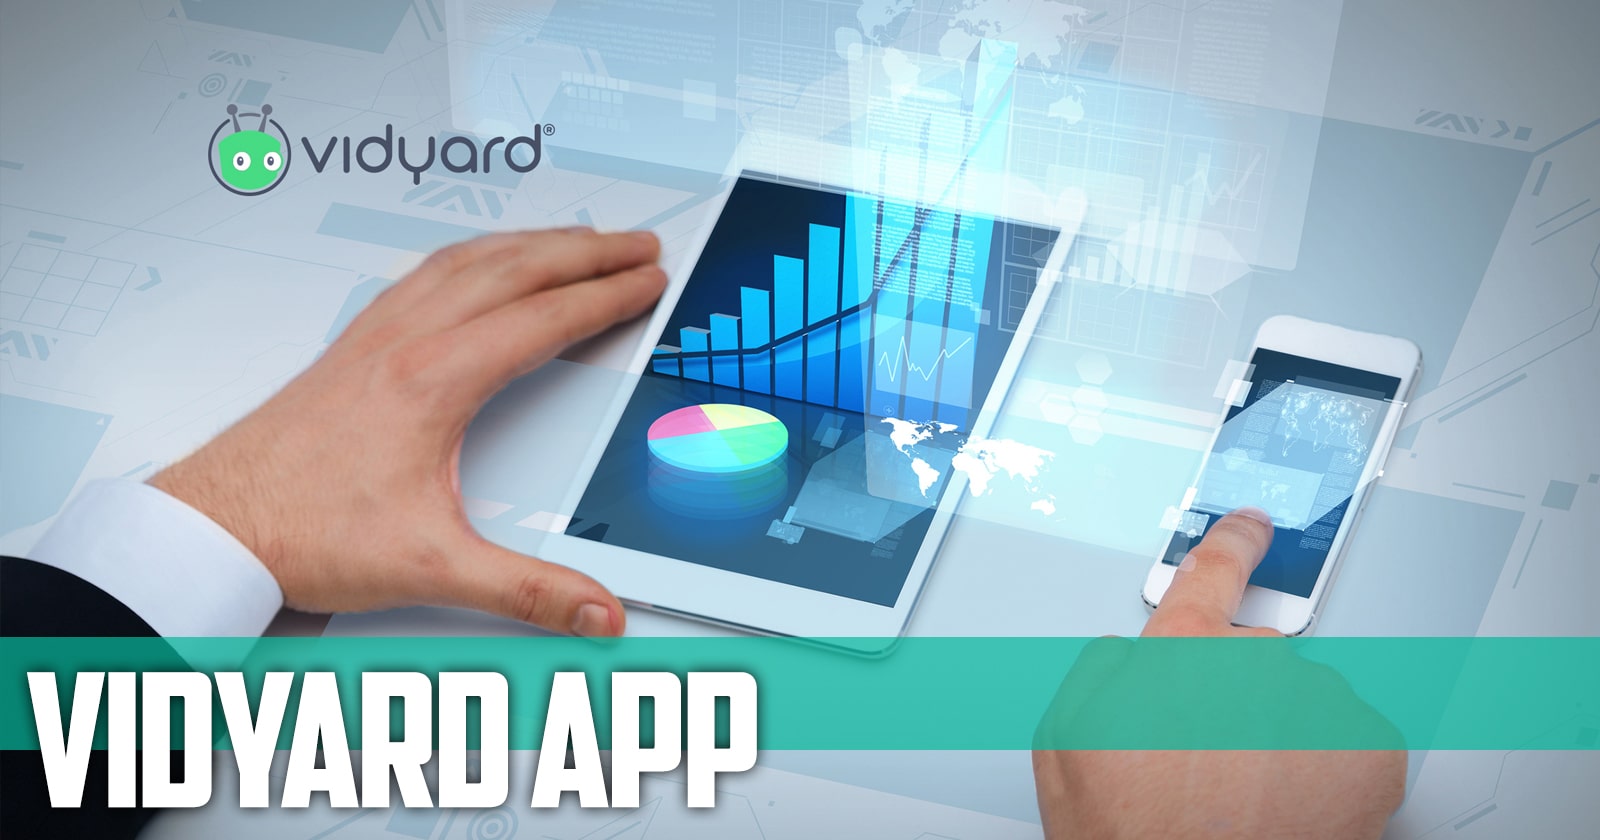 Vidyard is a video sending application for smartphones if you are looking for an application that can fulfill all your needs